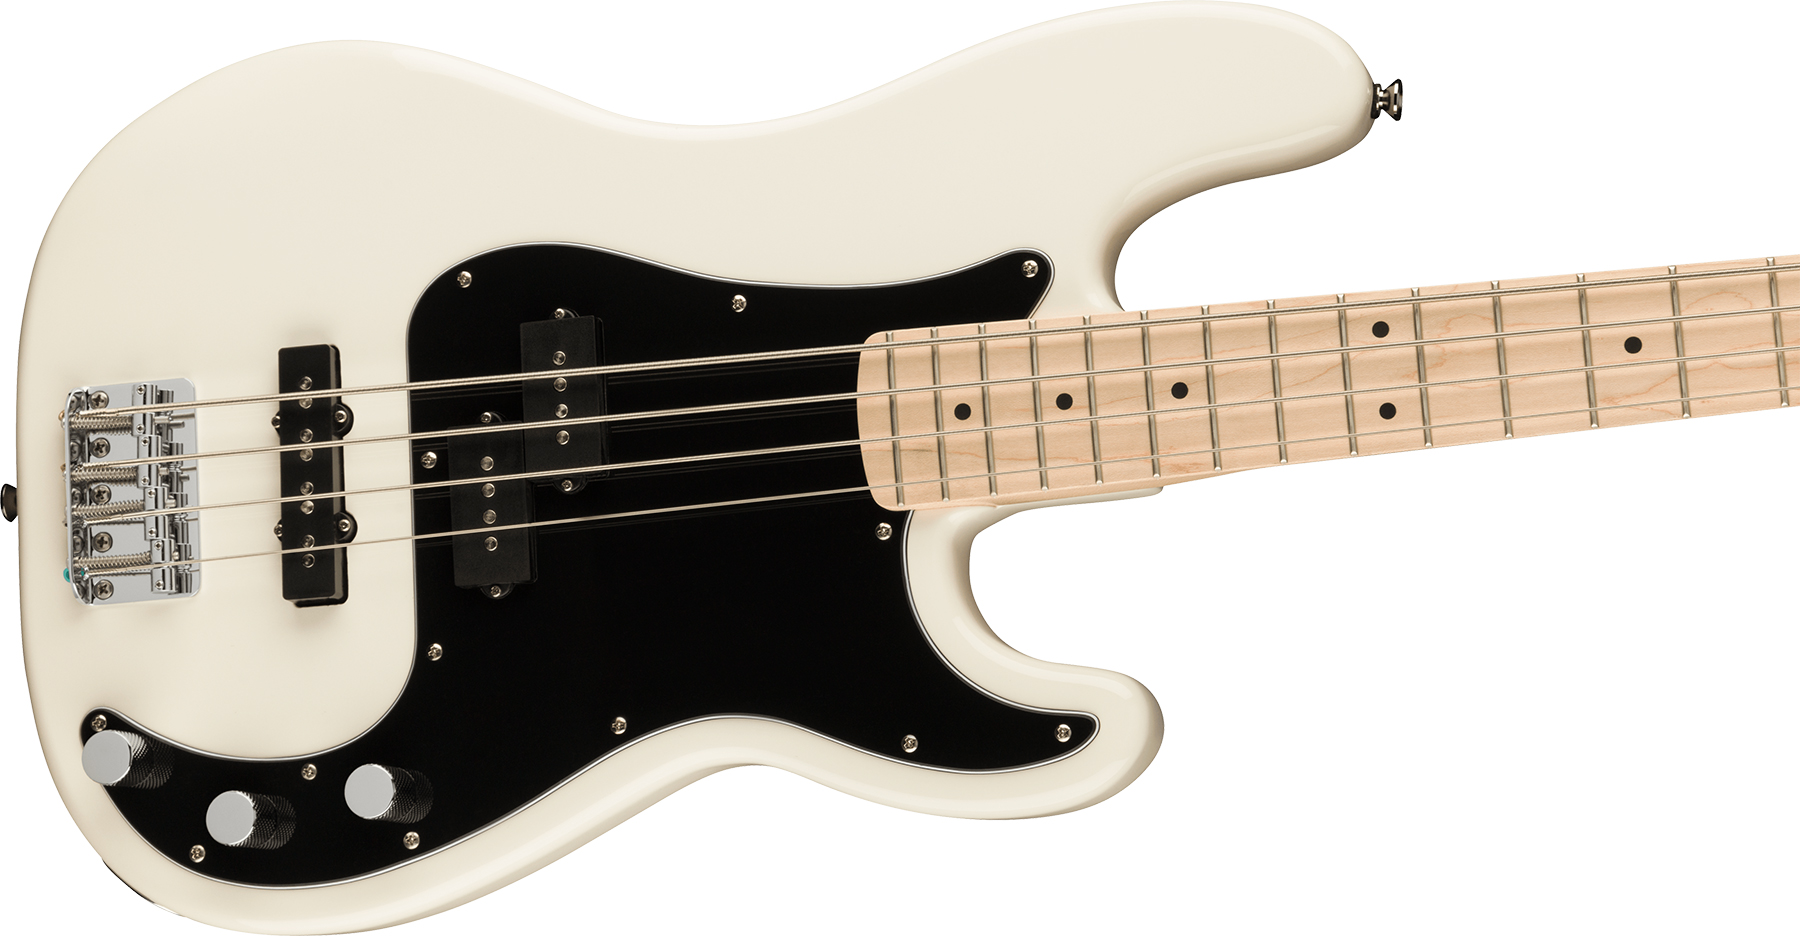 Squier Precision Bass Affinity Pj 2021 Mn - Olympic White - Solid body elektrische bas - Variation 2